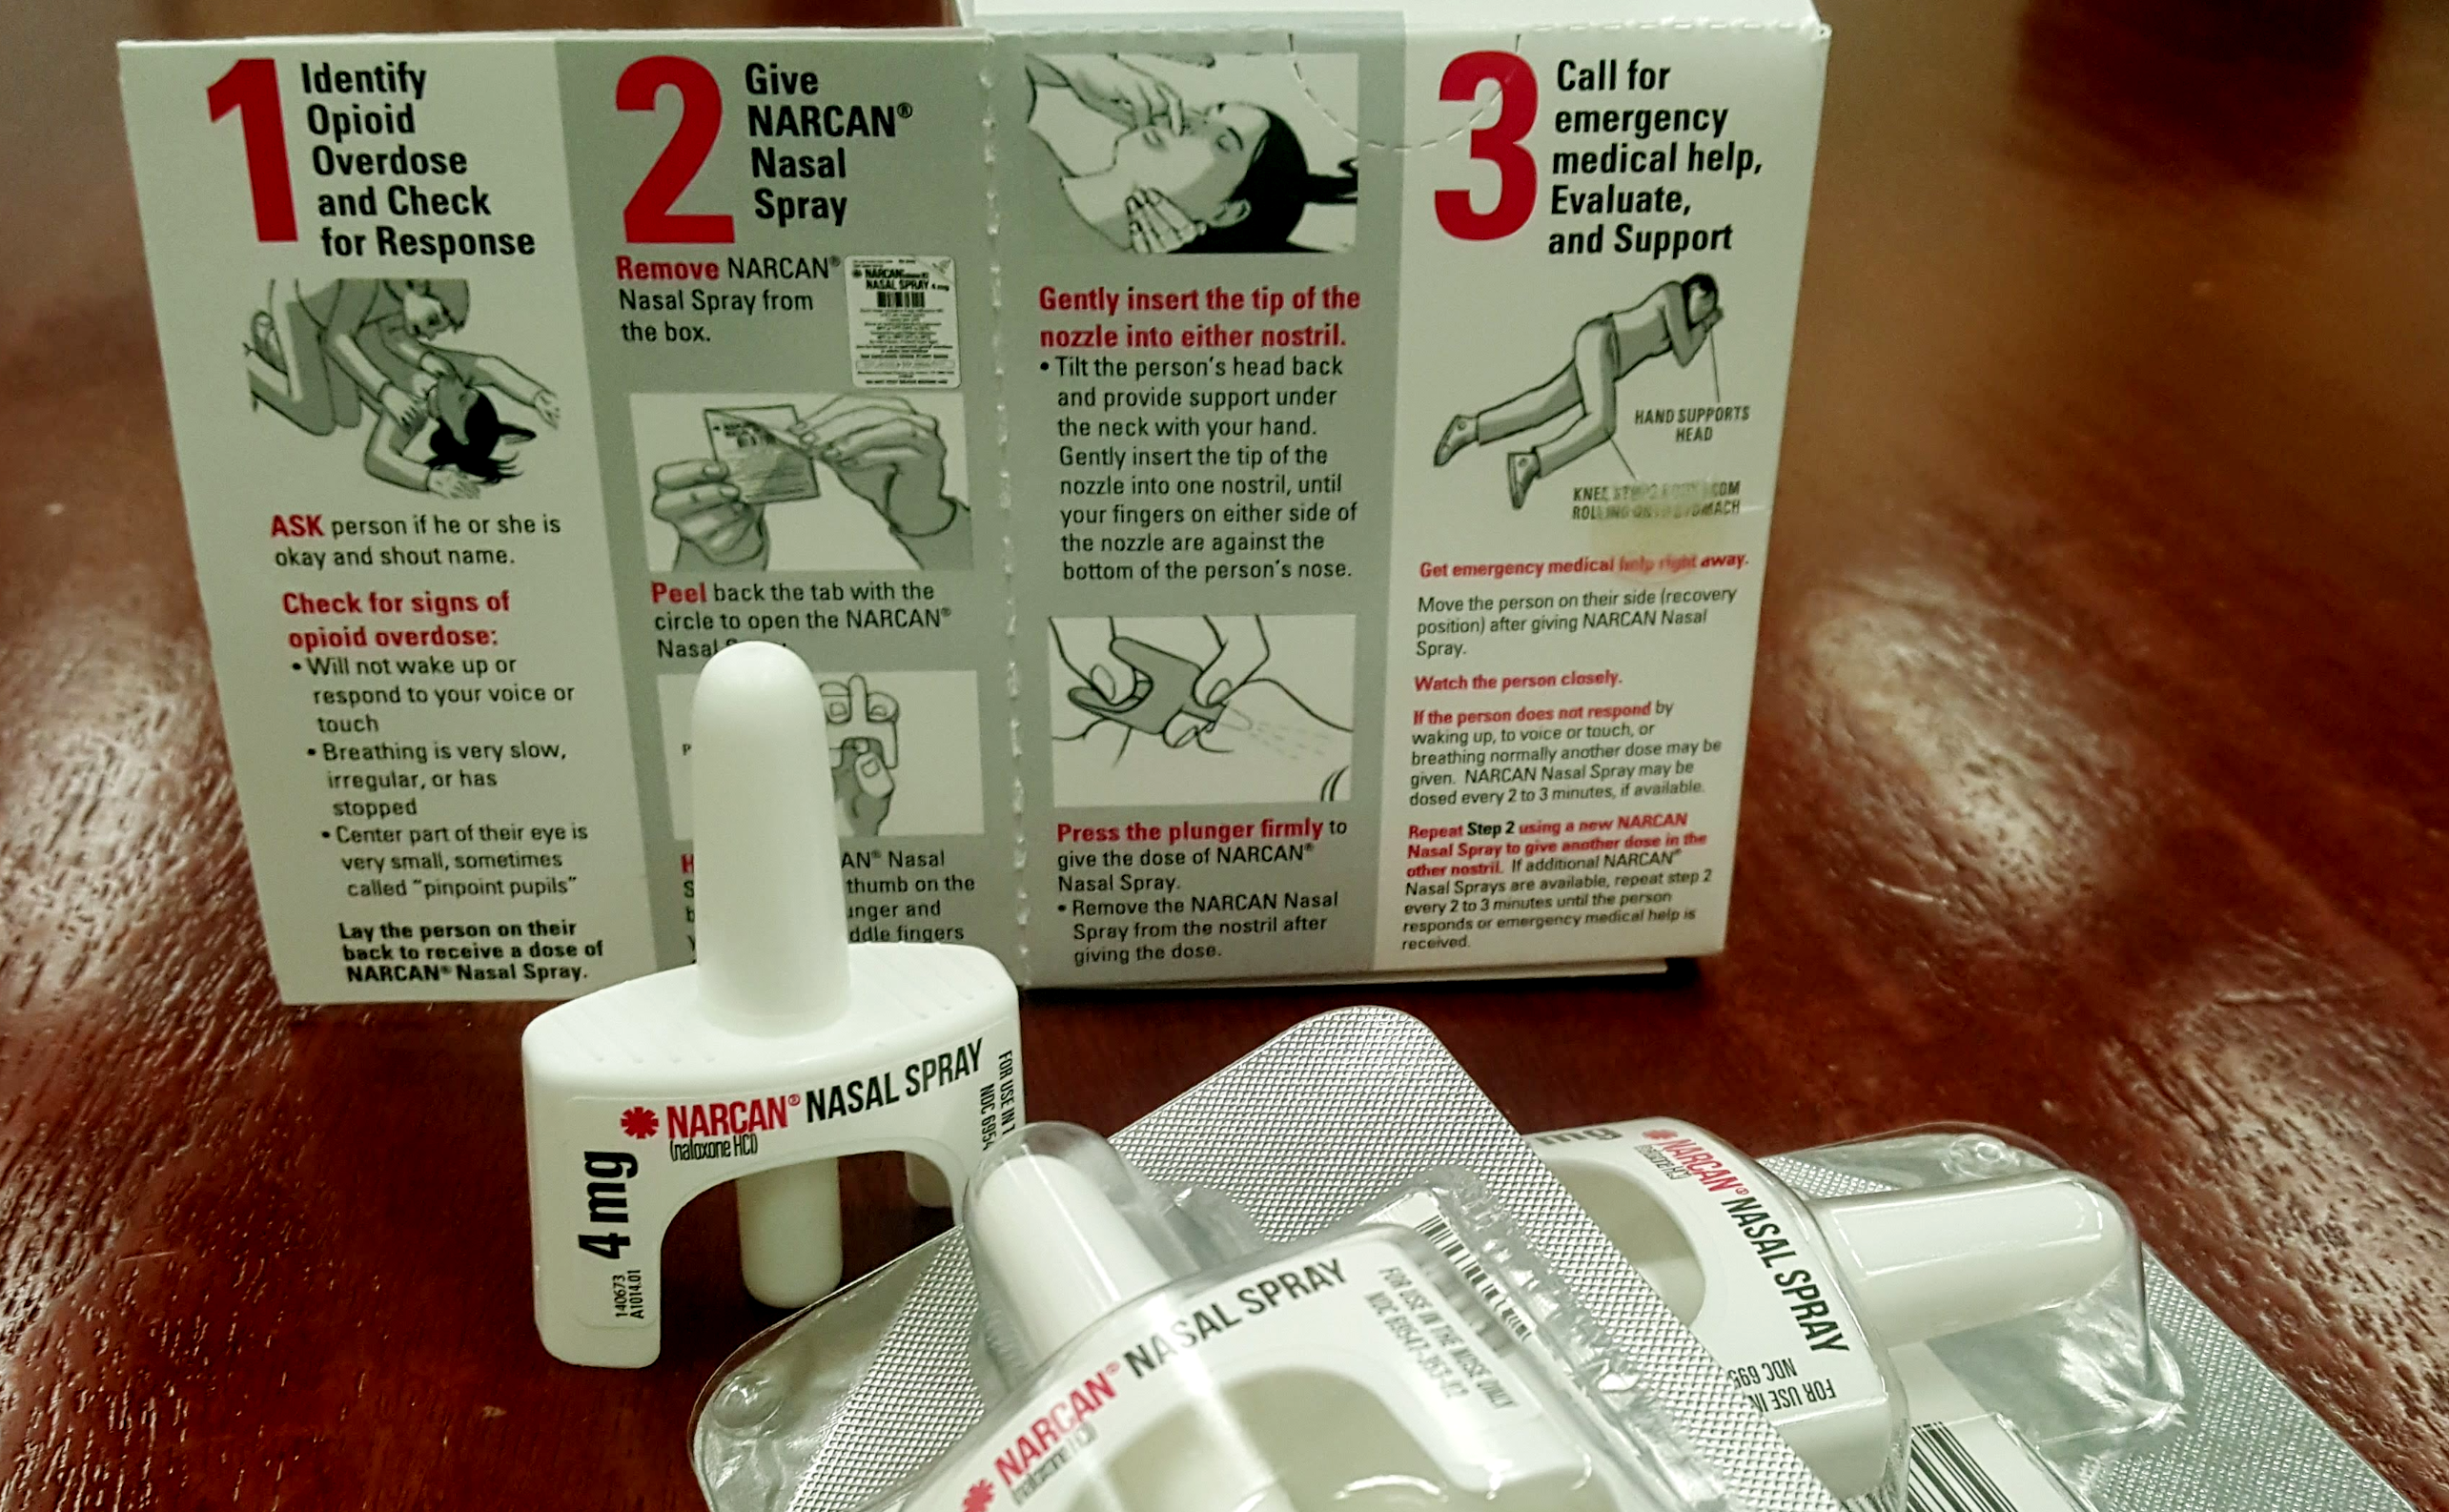 Erie County Dept of Health Opioid Overdose Recognition & Naloxone Use 4/26/2018